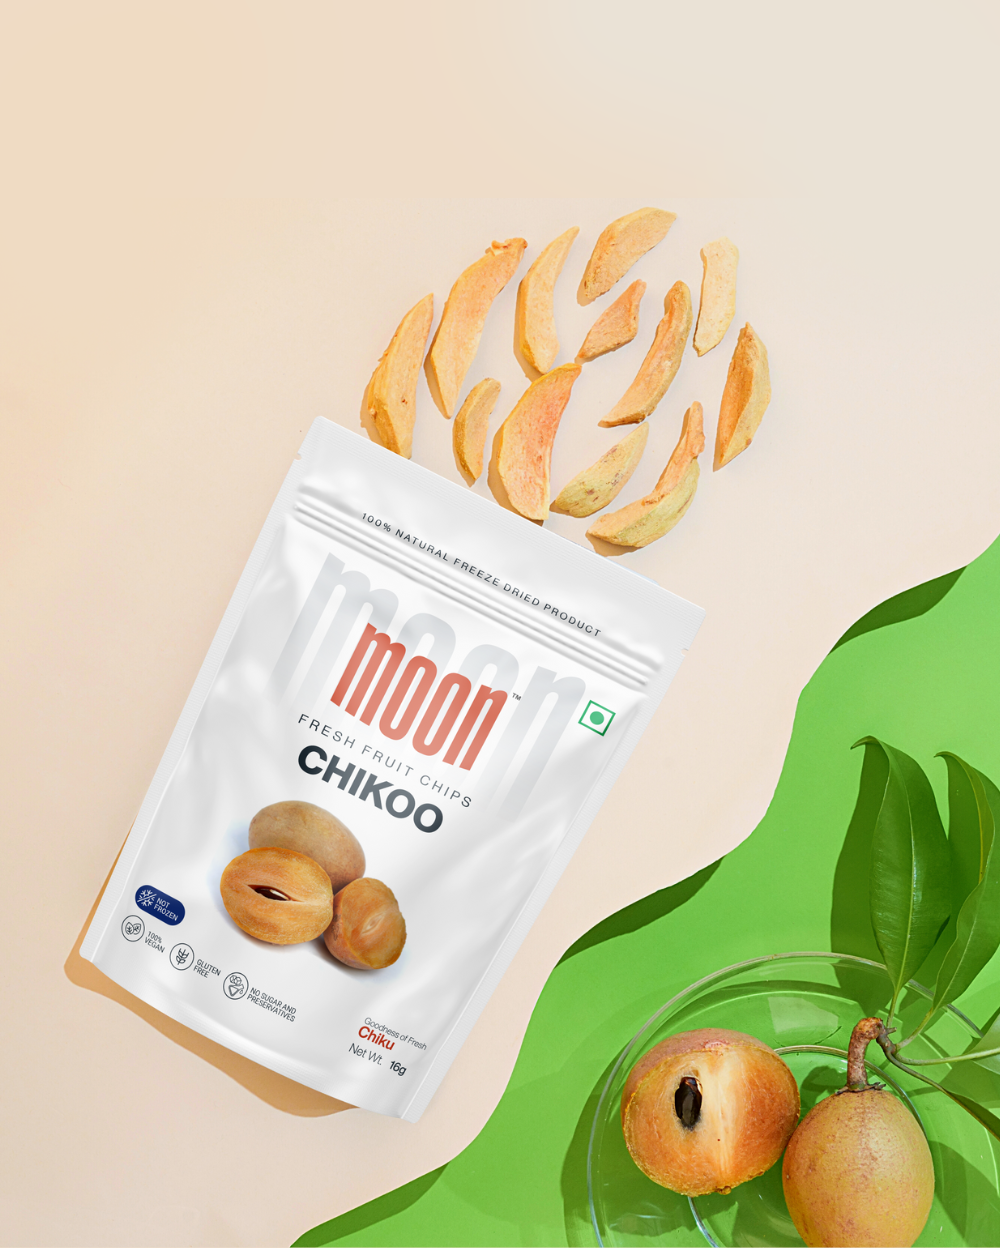 A packet of Moon Freeze Dried Chikoo + Kiwi slices with fresh chikoos and leaves on a beige background.